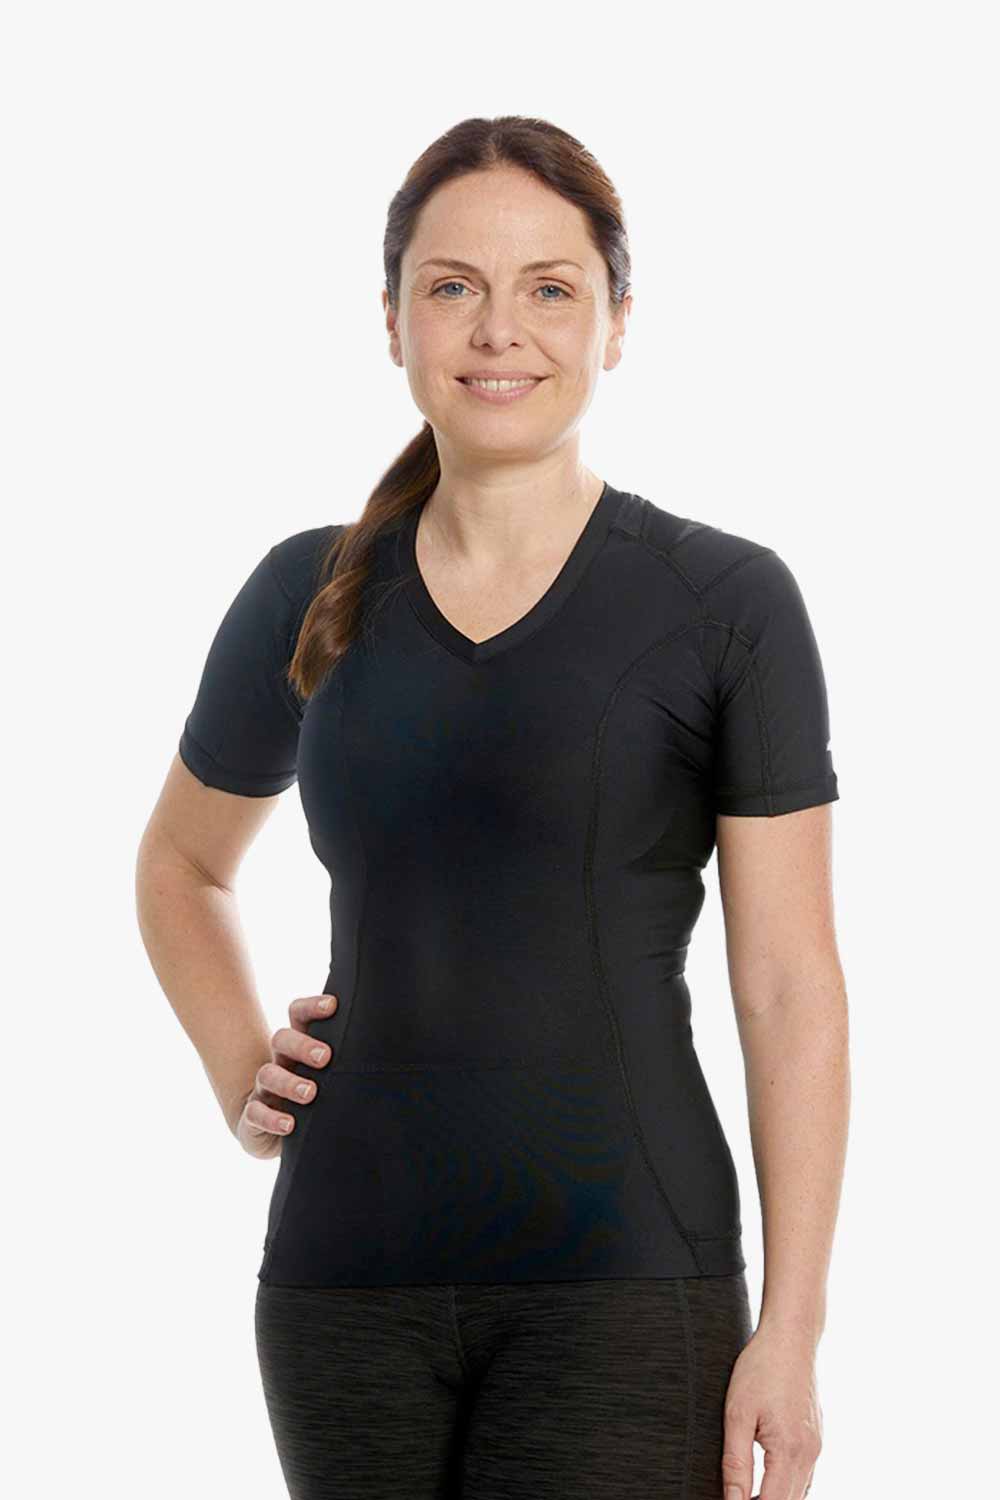 ActivePosture® - Posture Corrector T-Shirt for Women with Zipper, The  Original Posture Shirt for Back Support Relieves Tension and Pain, Shoulder and Back Support tshirt